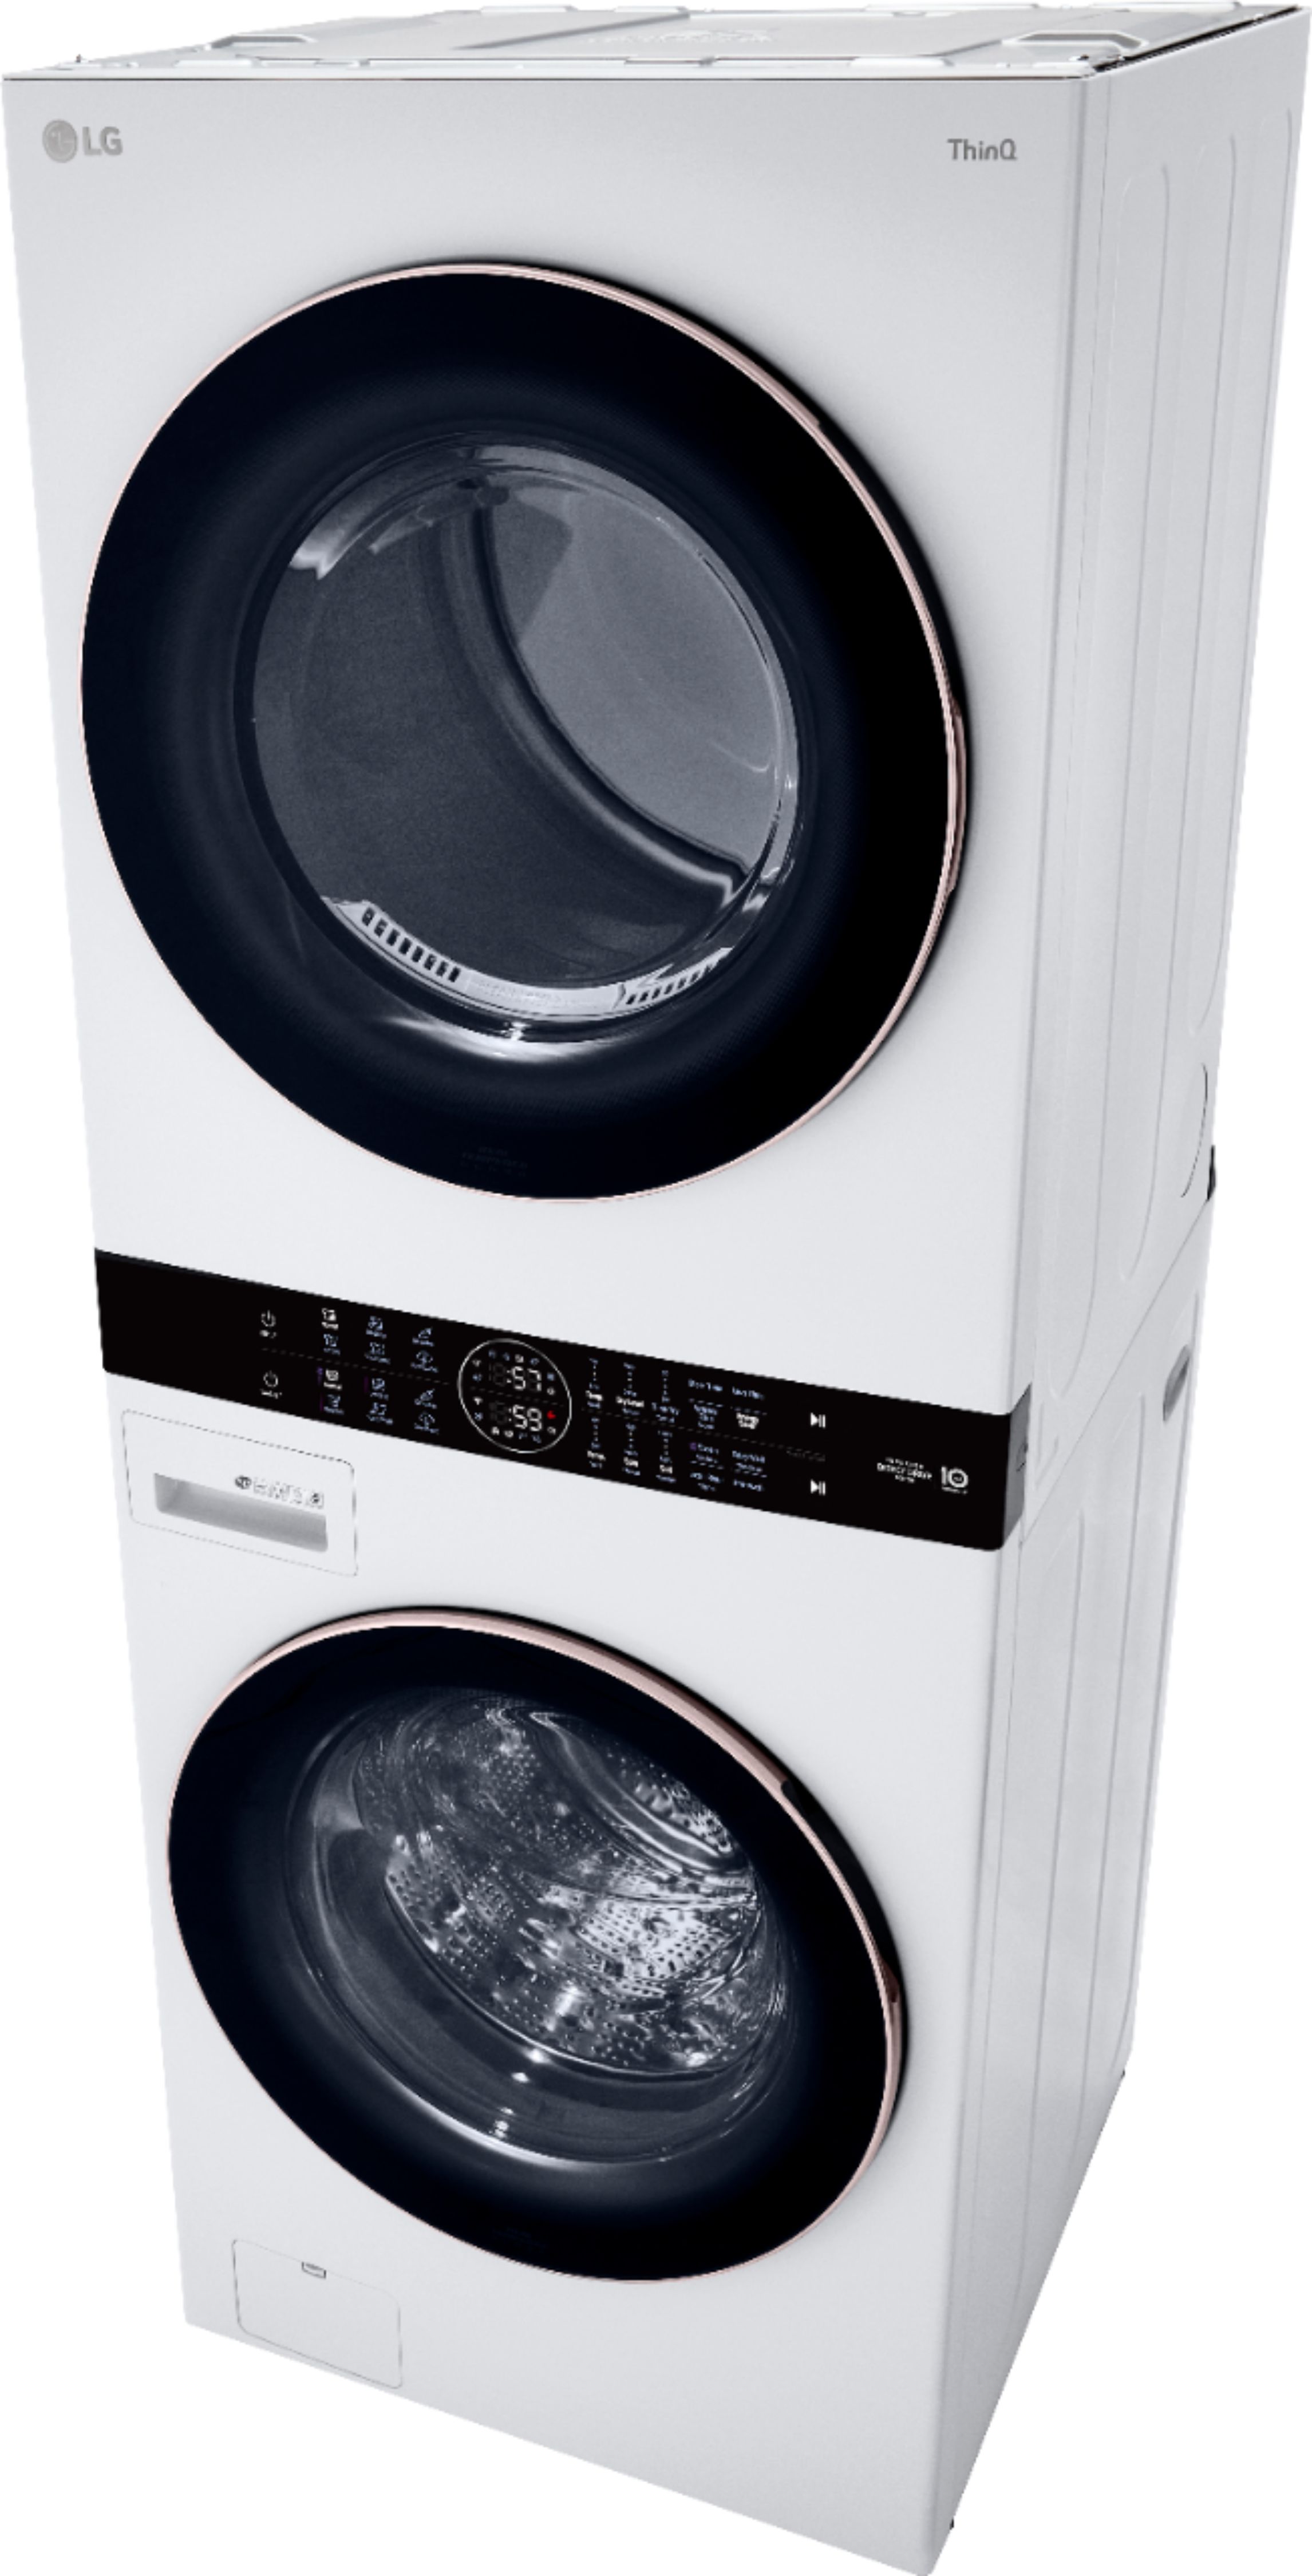 Angle View: LG - 4.5 Cu. Ft. HE Smart Front Load Washer and 7.4 Cu. Ft. Electric Dryer WashTower with Built-In Intelligence - White